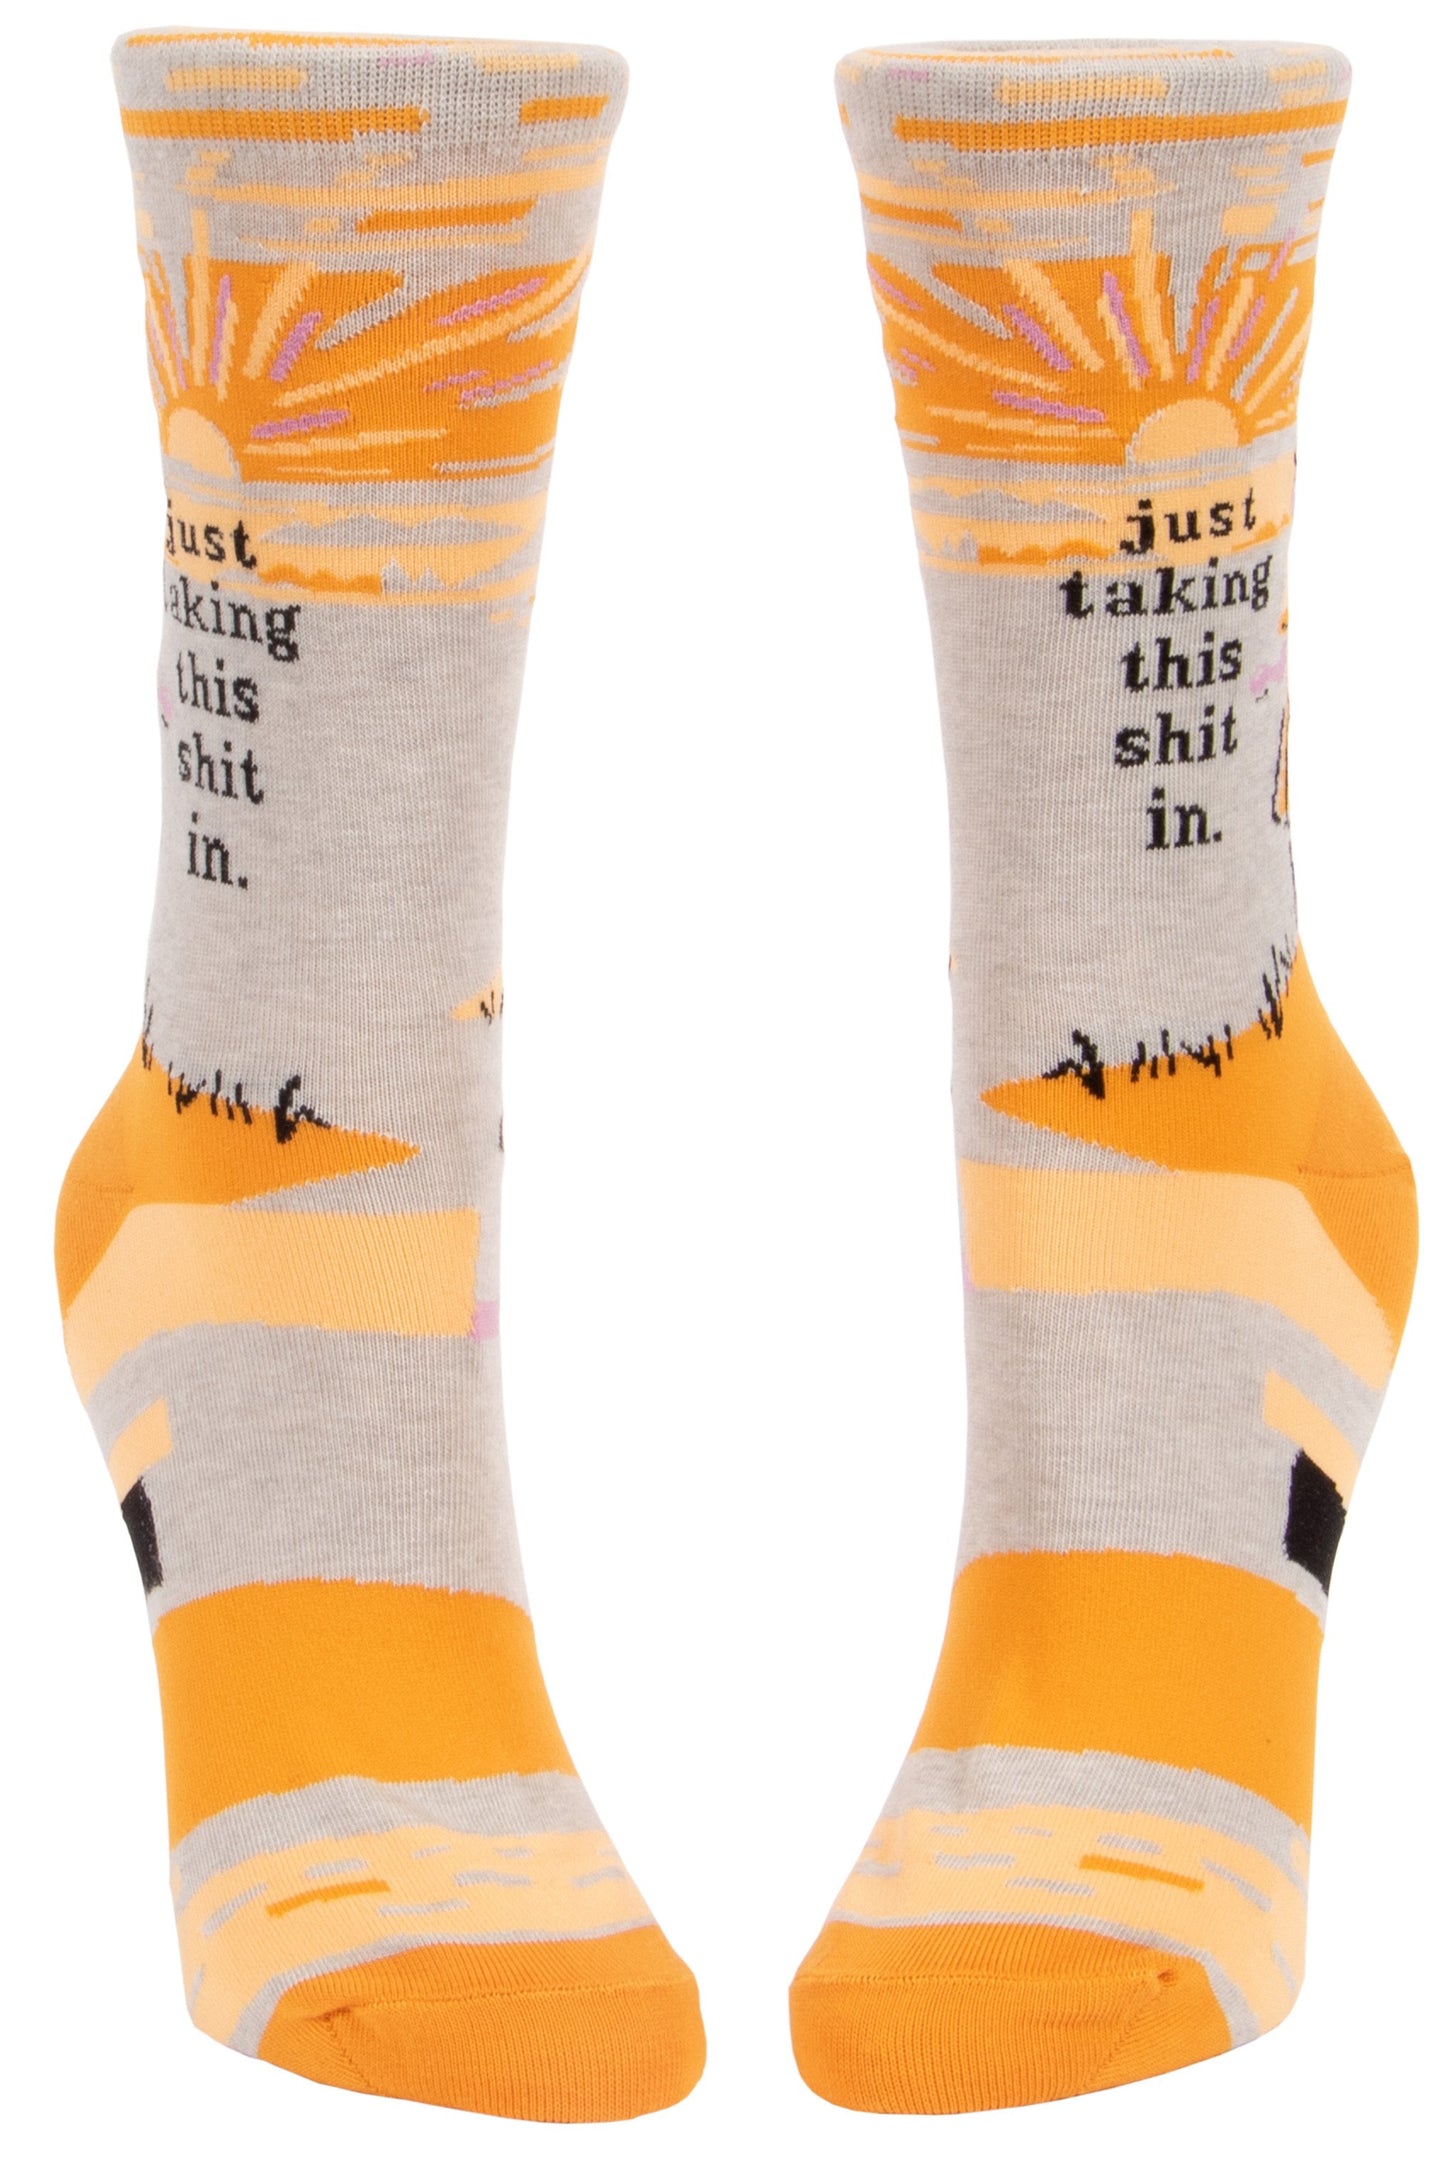 Blue Q - Women's Crew Socks - Just Taking This Shxt In